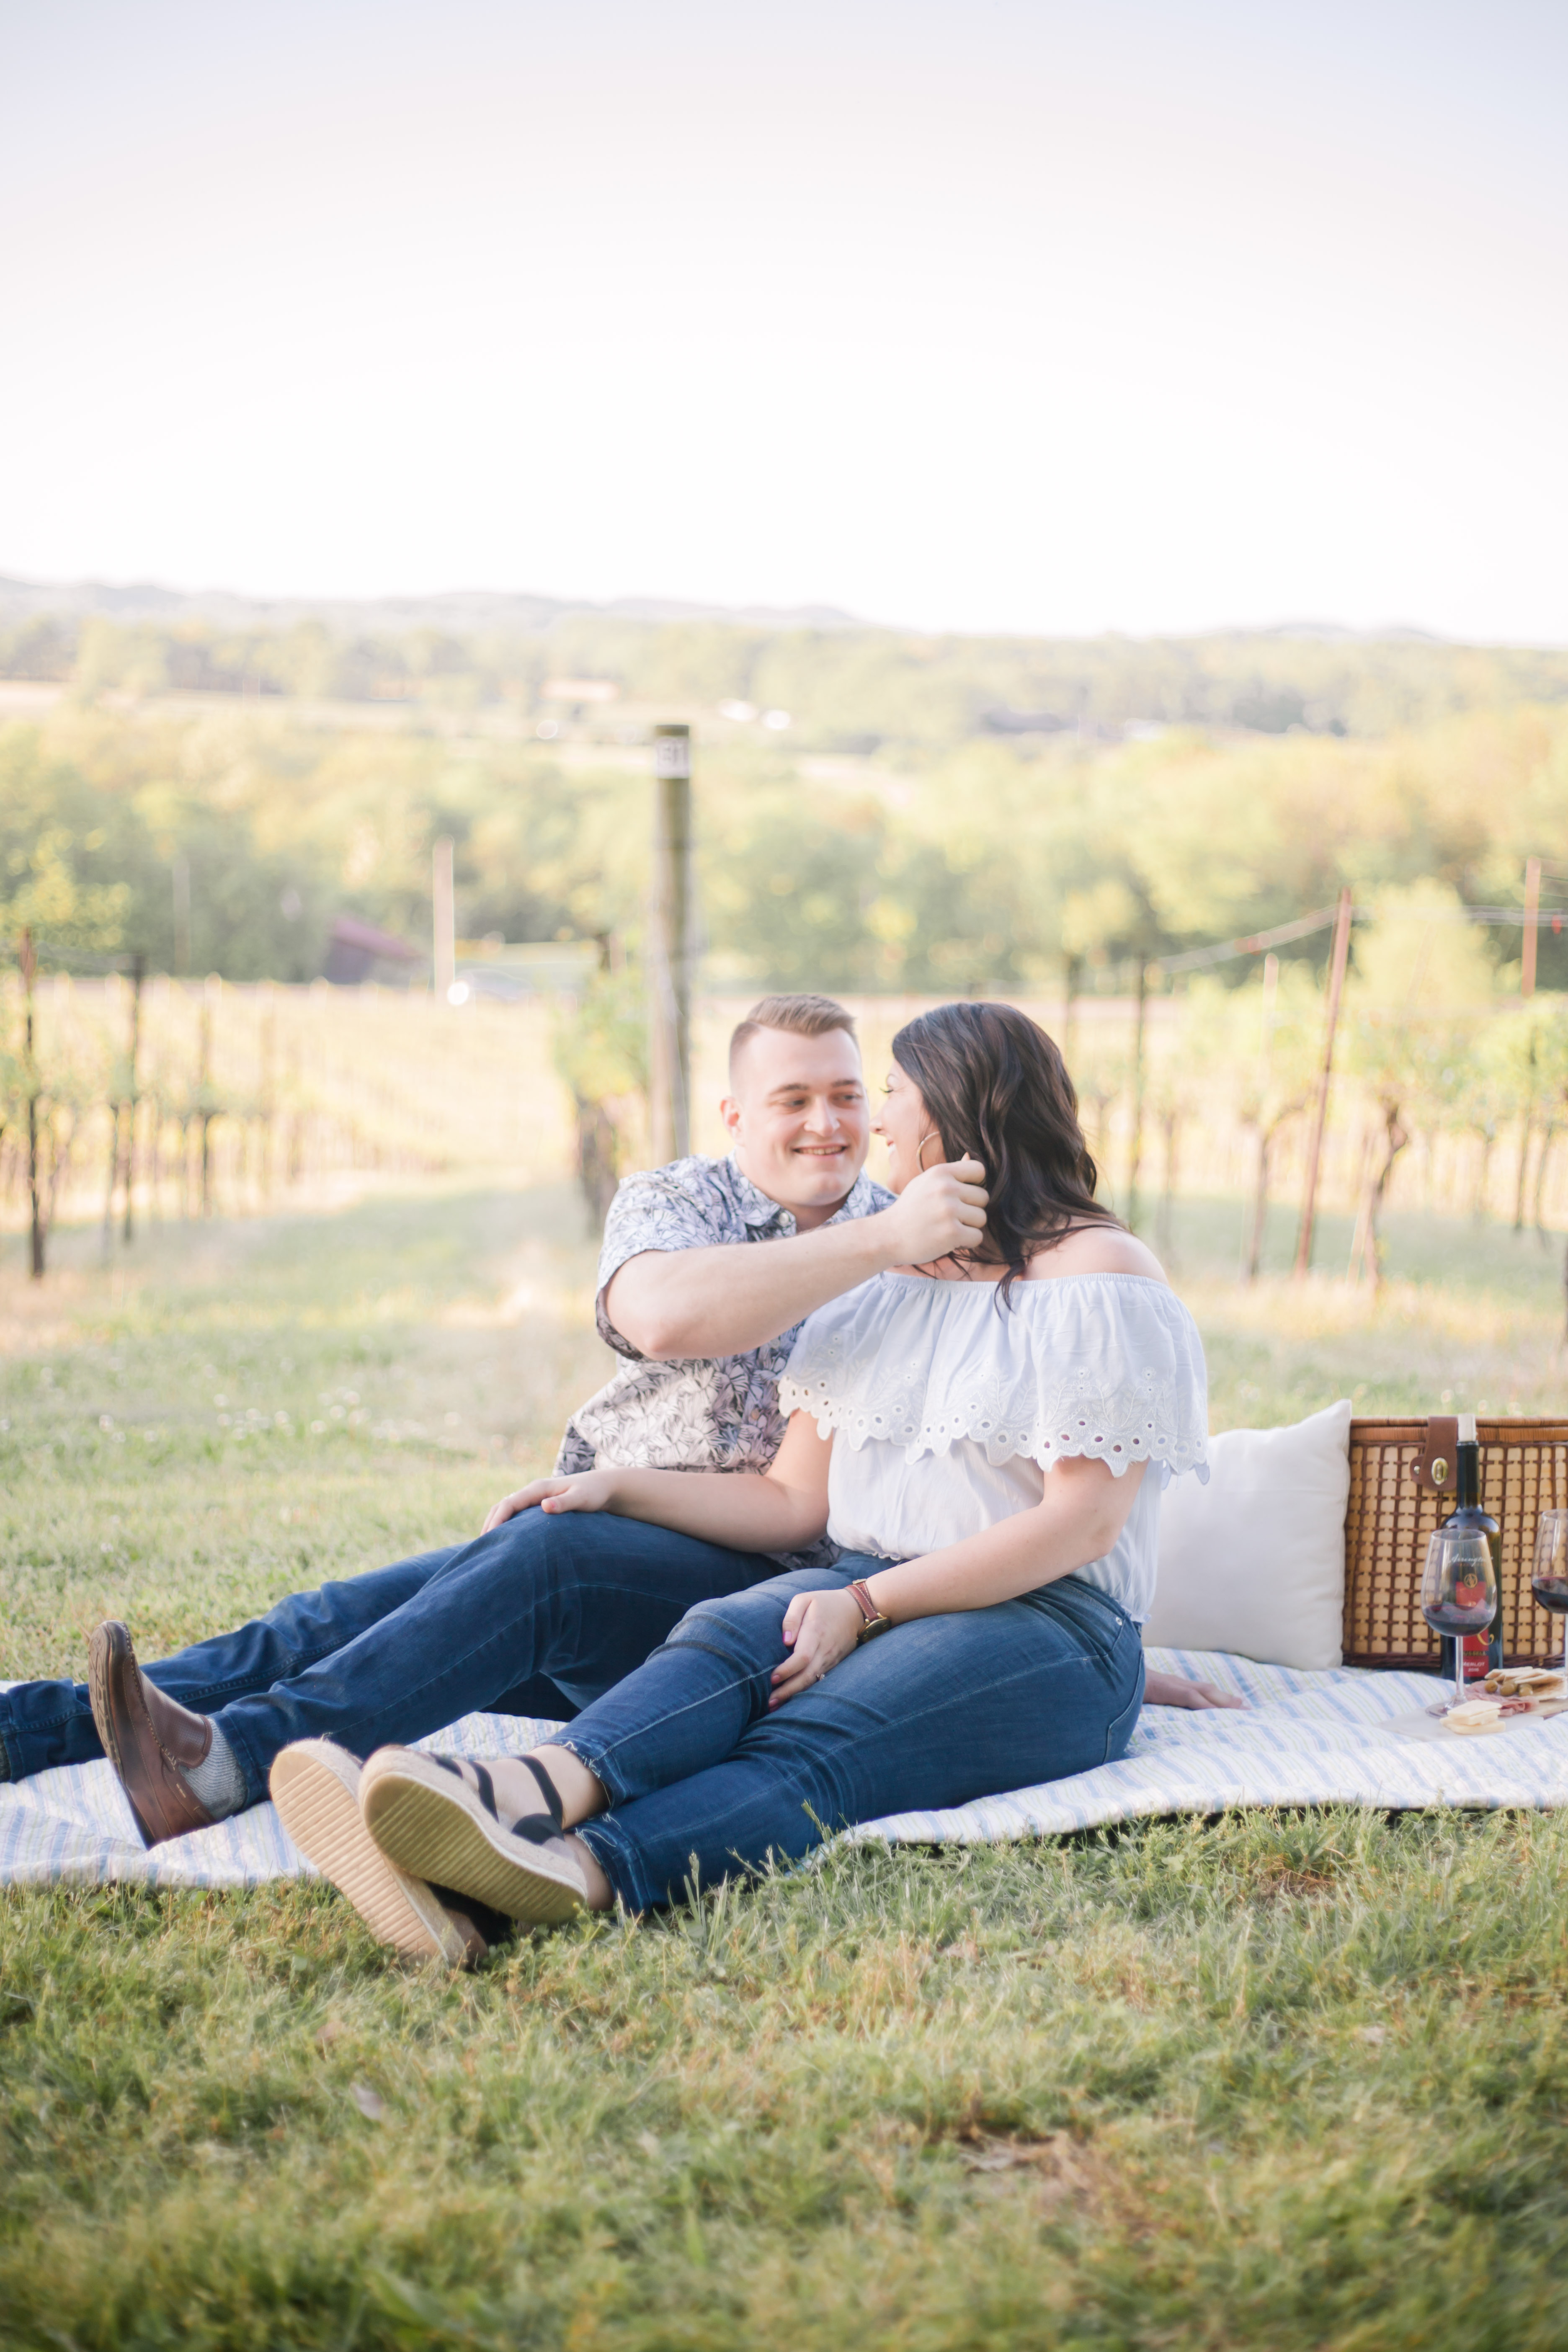 cute couple in jeans sitting on blanket picnic